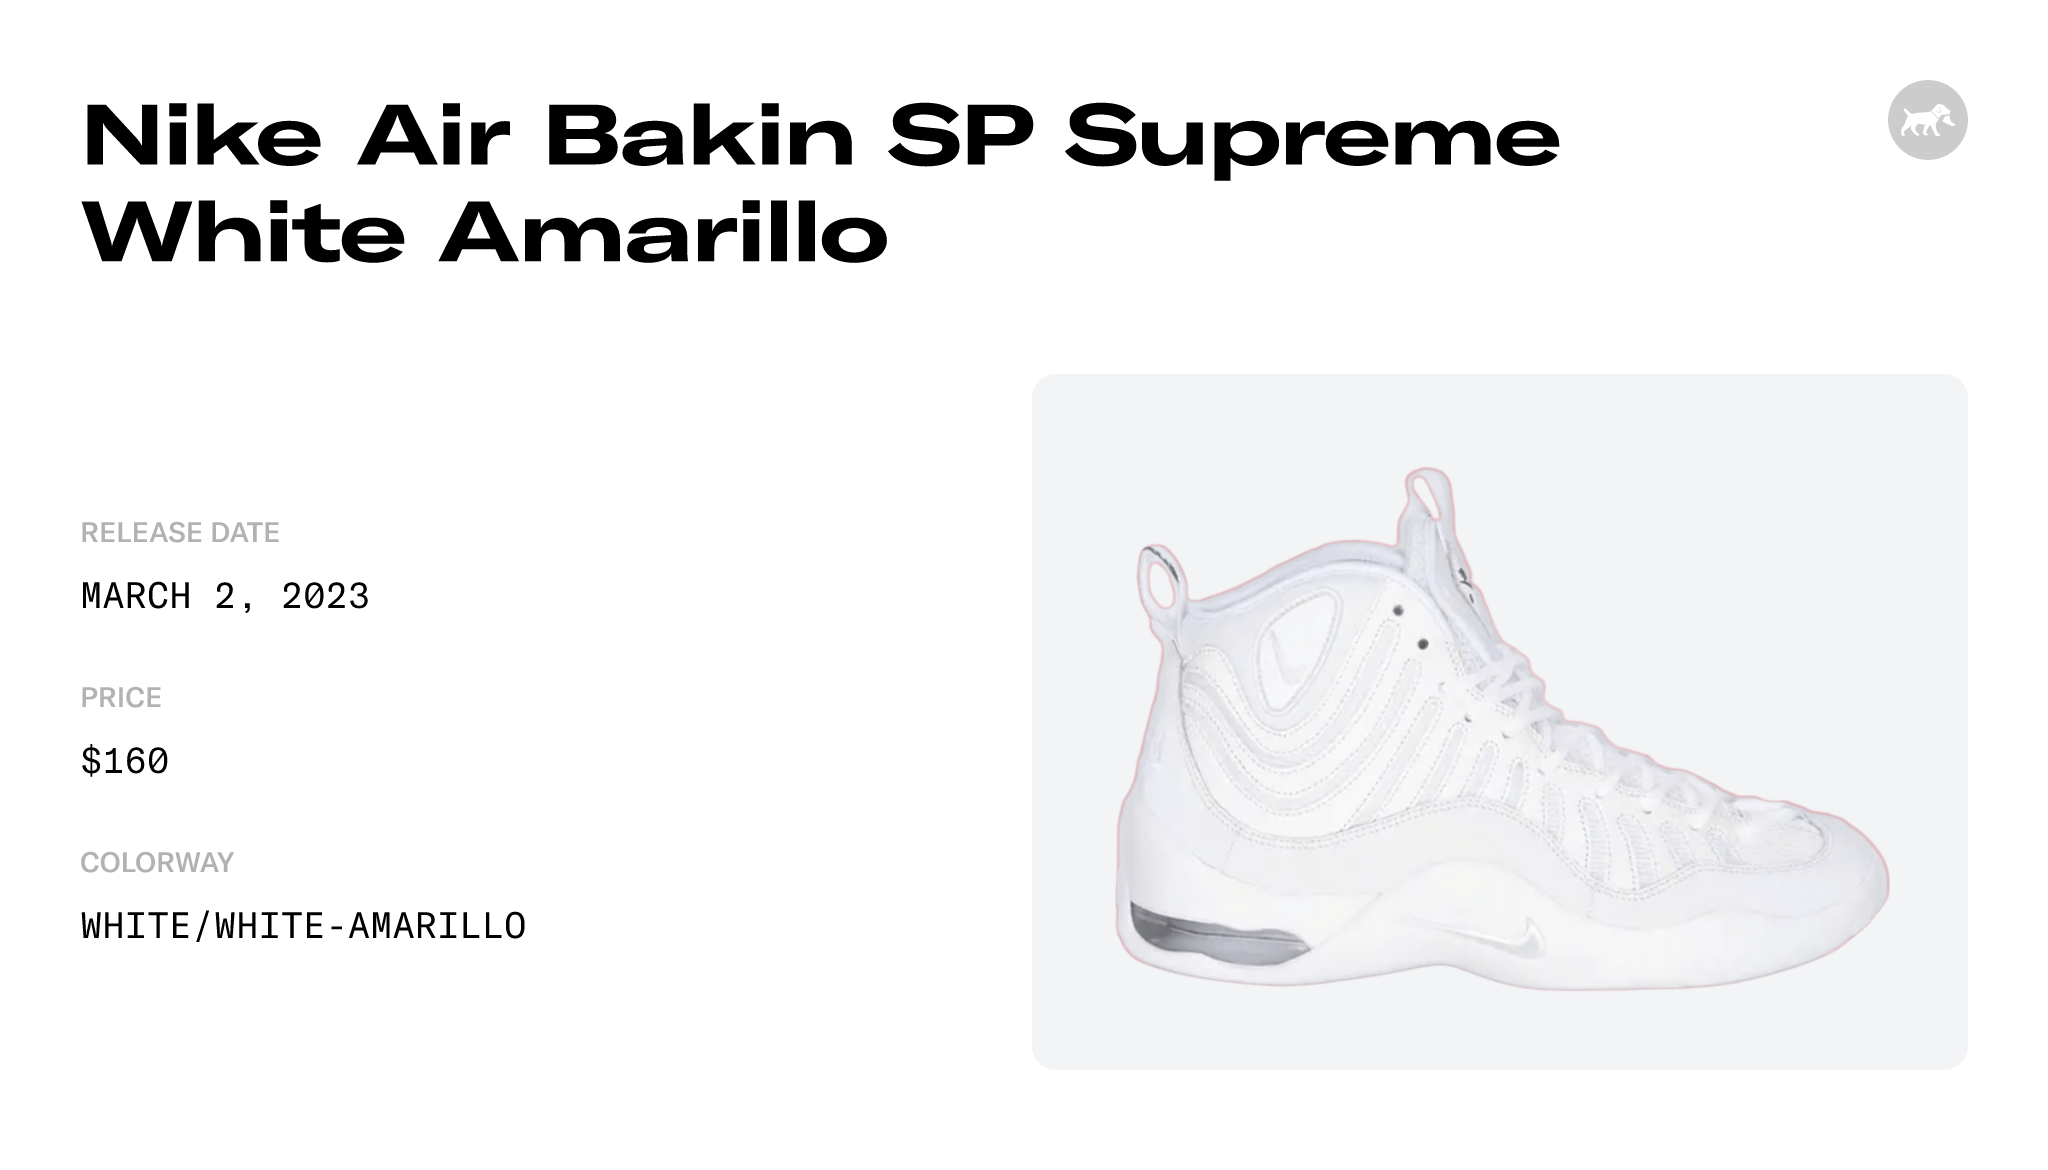 Nike Air Bakin SP Supreme White Amarillo - DX3292-100 Raffles and Release  Date